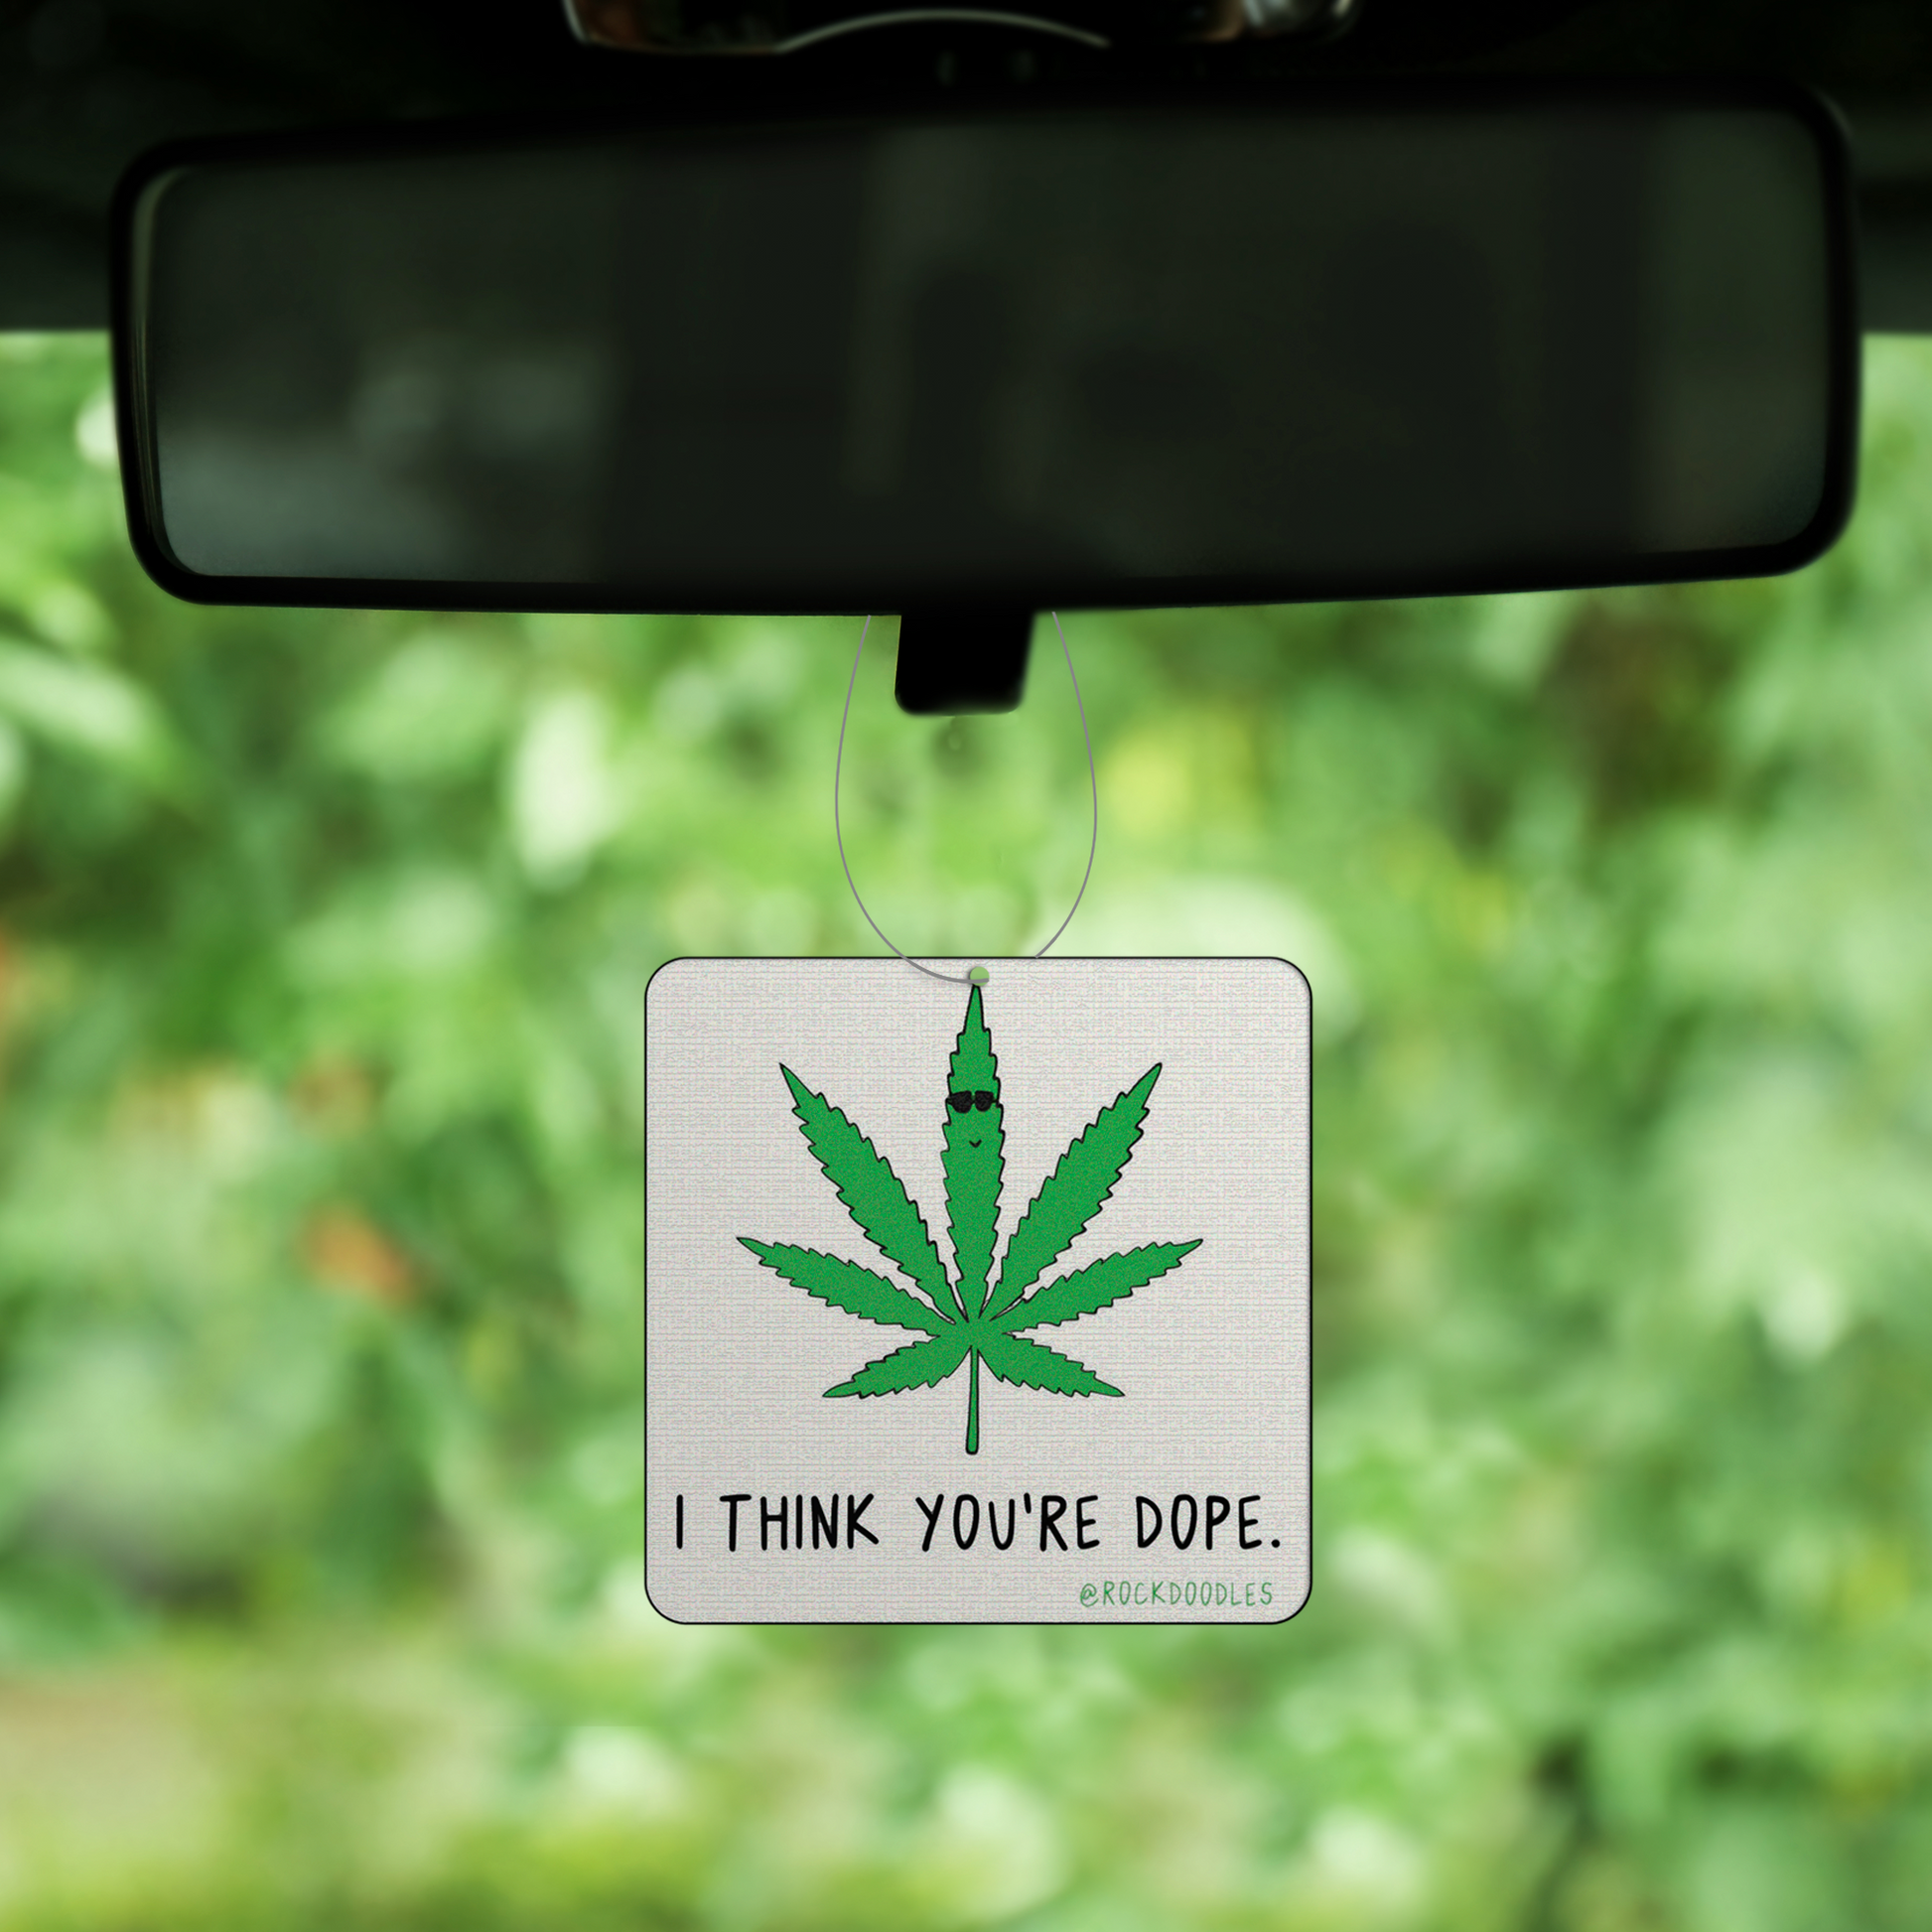 Enhance your driving experience with our refreshing You're Dope (2-Pack) Punny Air Freshener - Pine Forest Scent by rockdoodles.